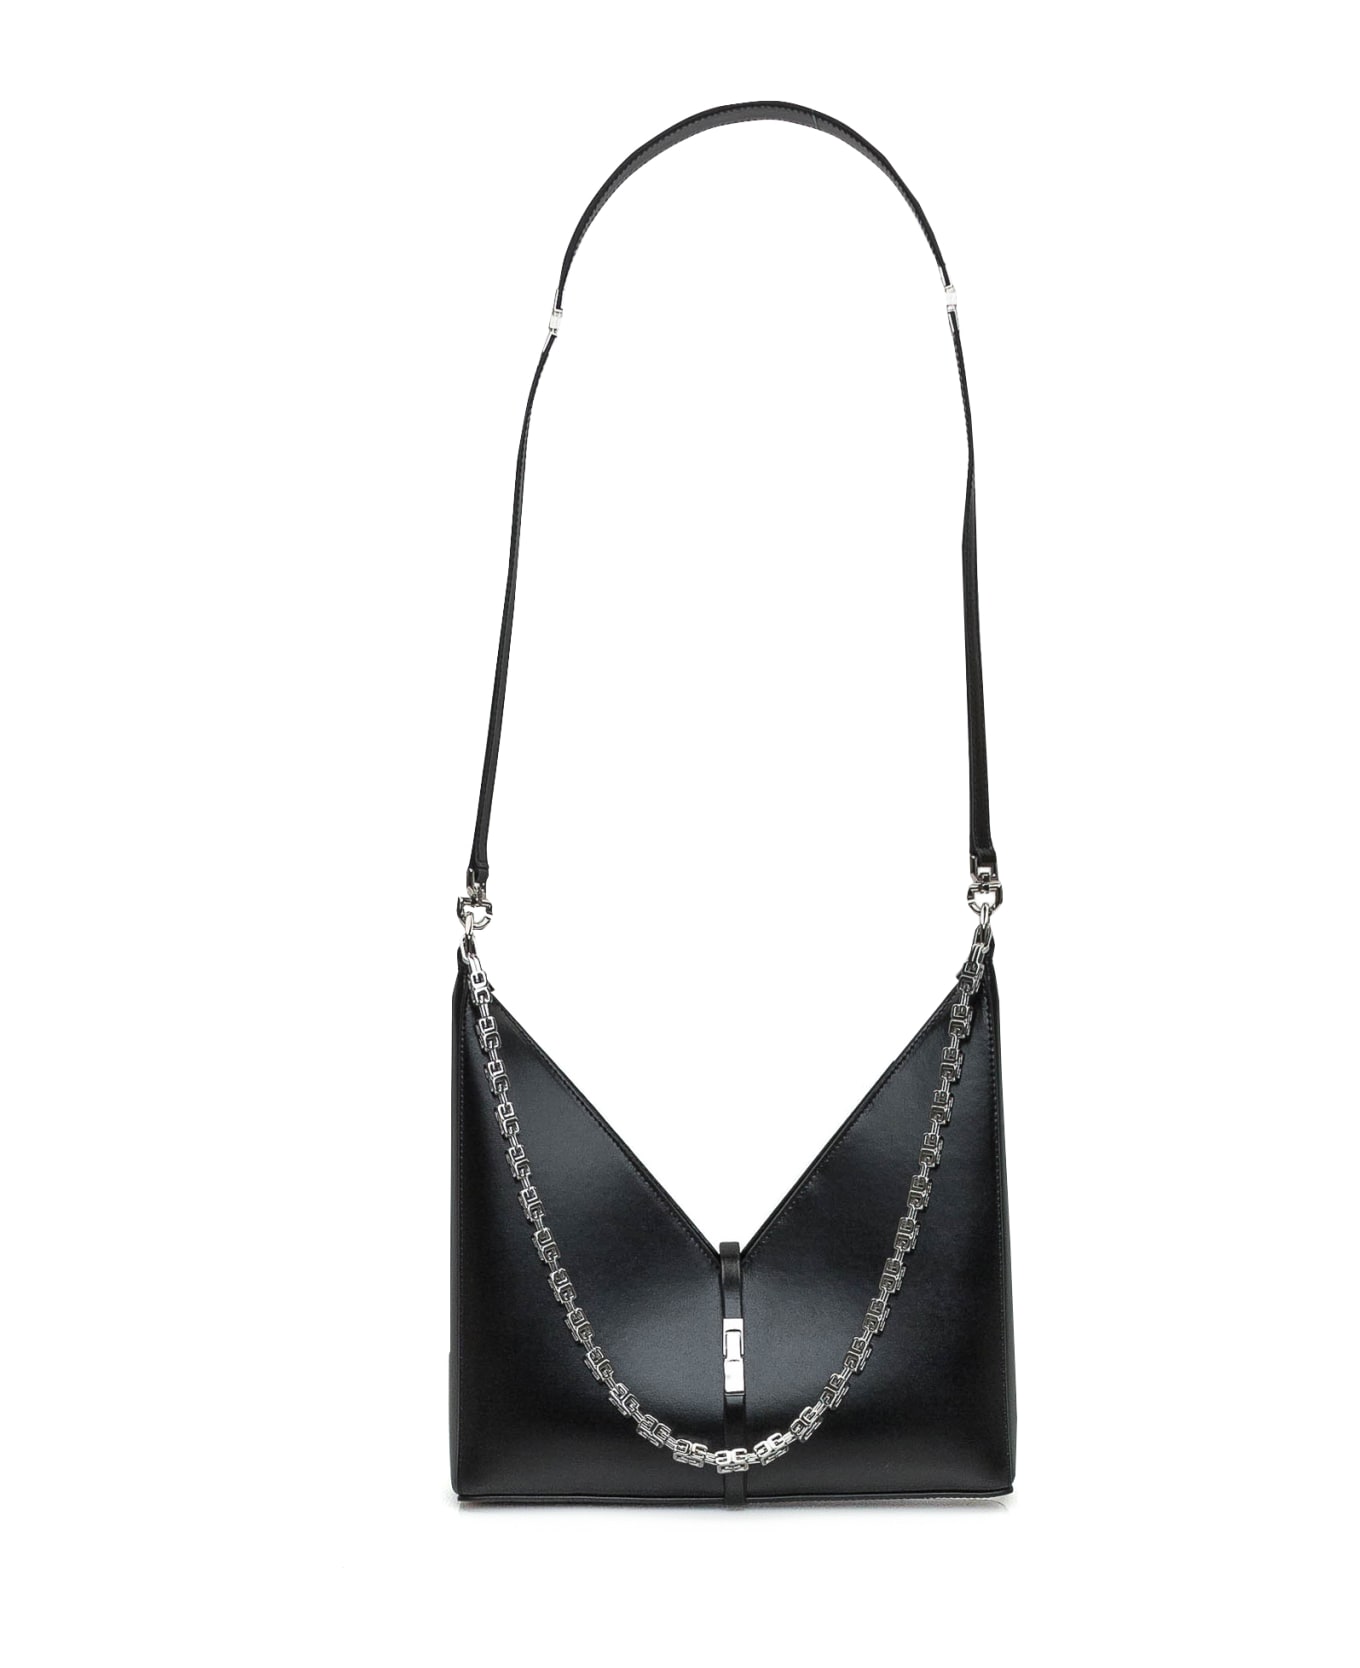 Givenchy Cut Out Small Bag - BLACK